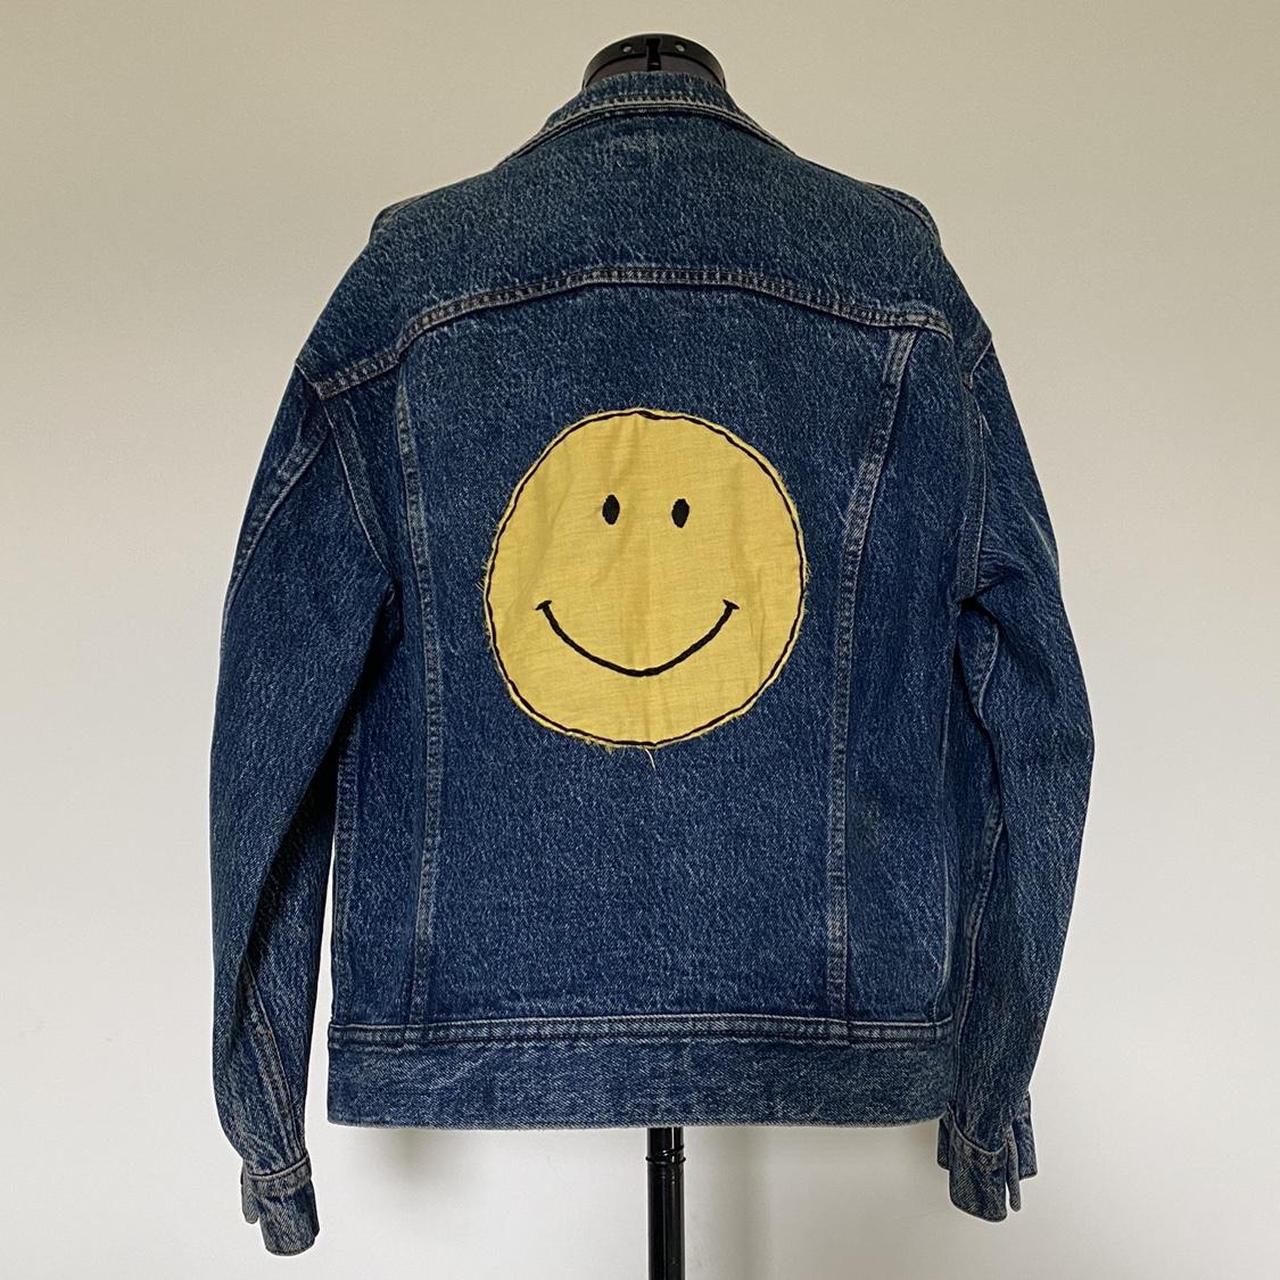 Lee Jeans Plays Hide-And-Seek With The Iconic Smiley For Its Anniversary | Lee  jeans, Denim on denim looks, Denim jacket with hoodie